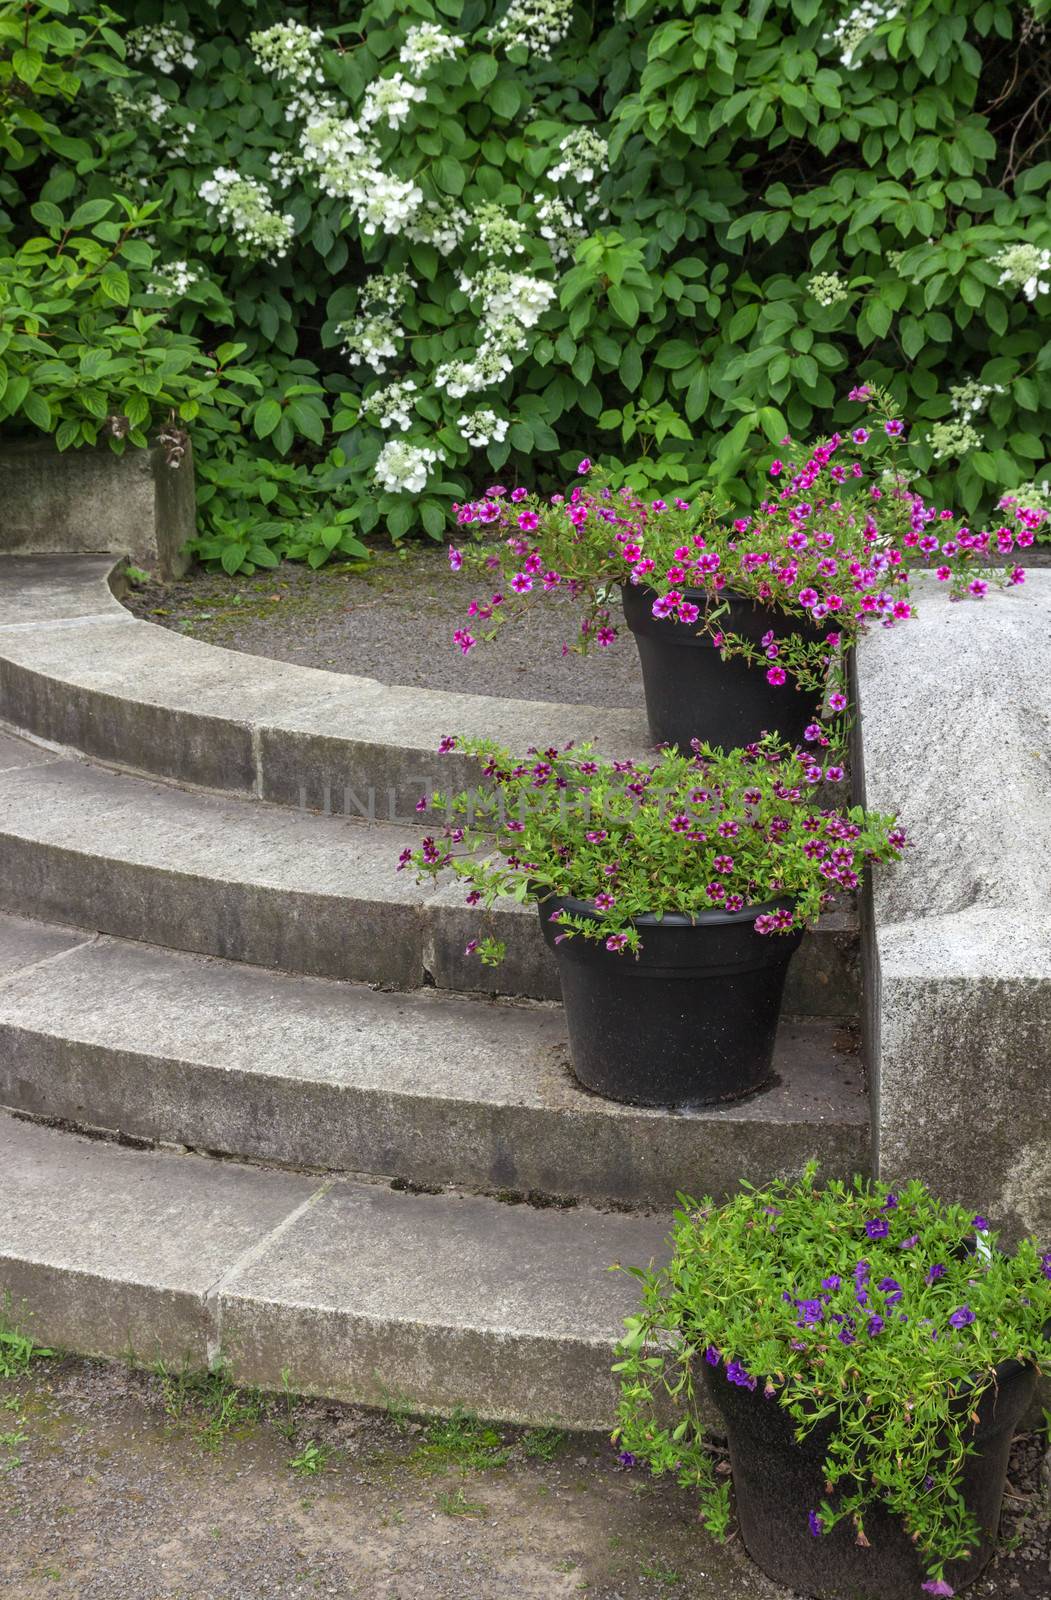 Pots with colorful flowers decorating stone steps in a garden.